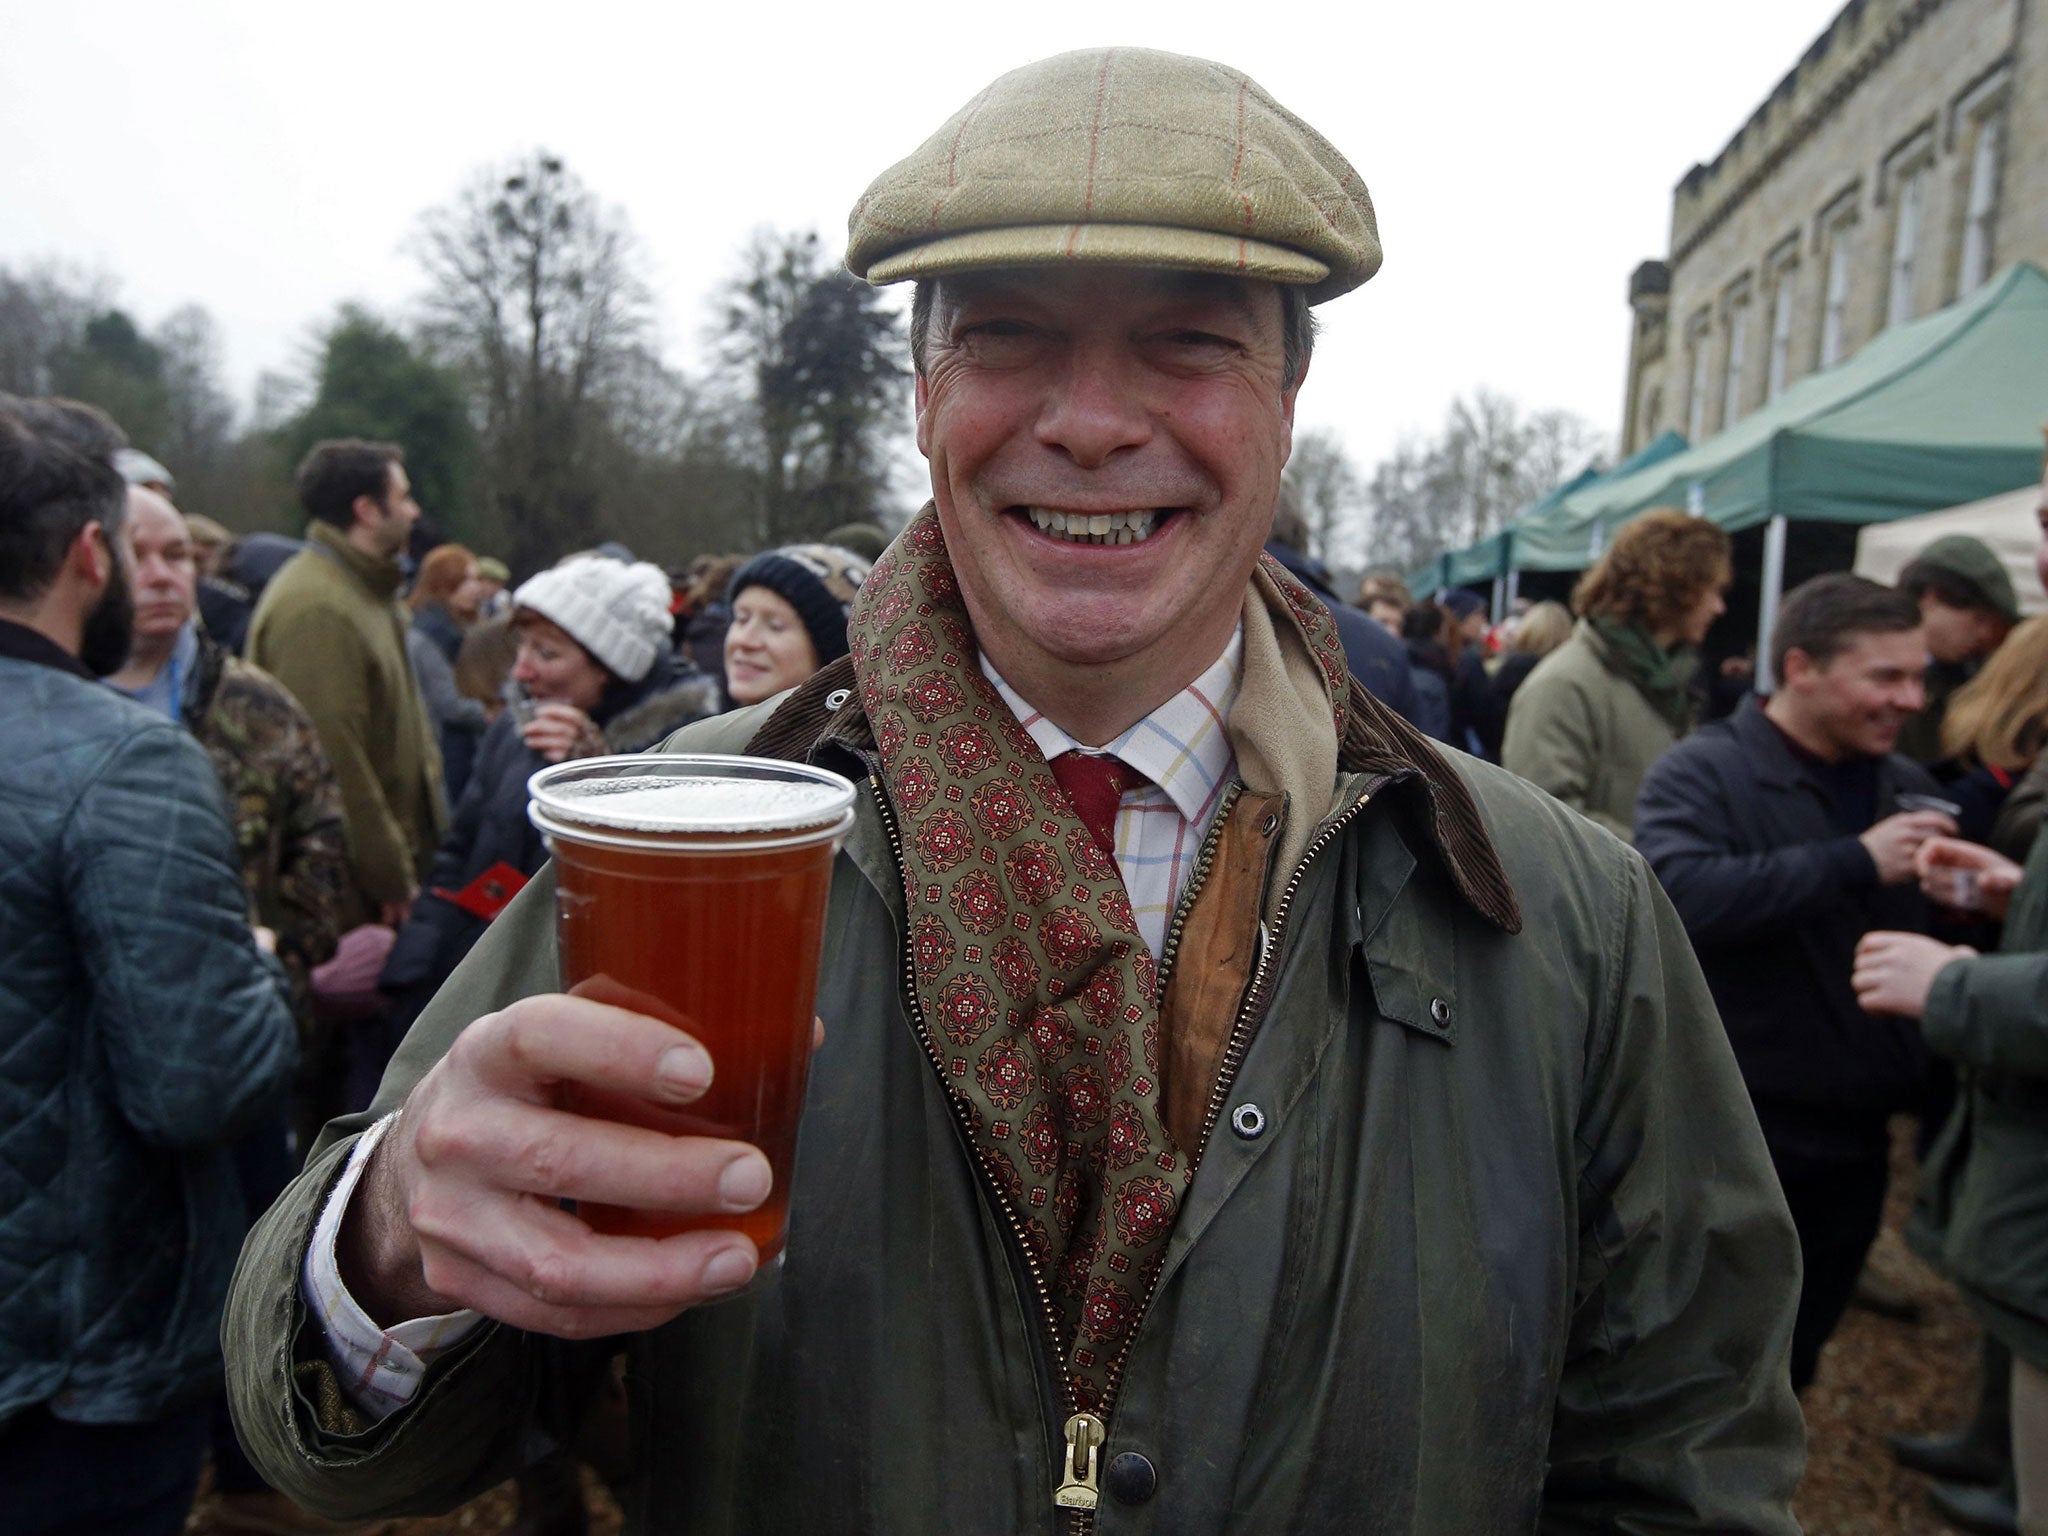 Ukip leader Nigel Farage attends the meet of the Old Surrey Burstow and West Kent Hunt at Chiddingstone Castle for 2014's Boxing Day hunt